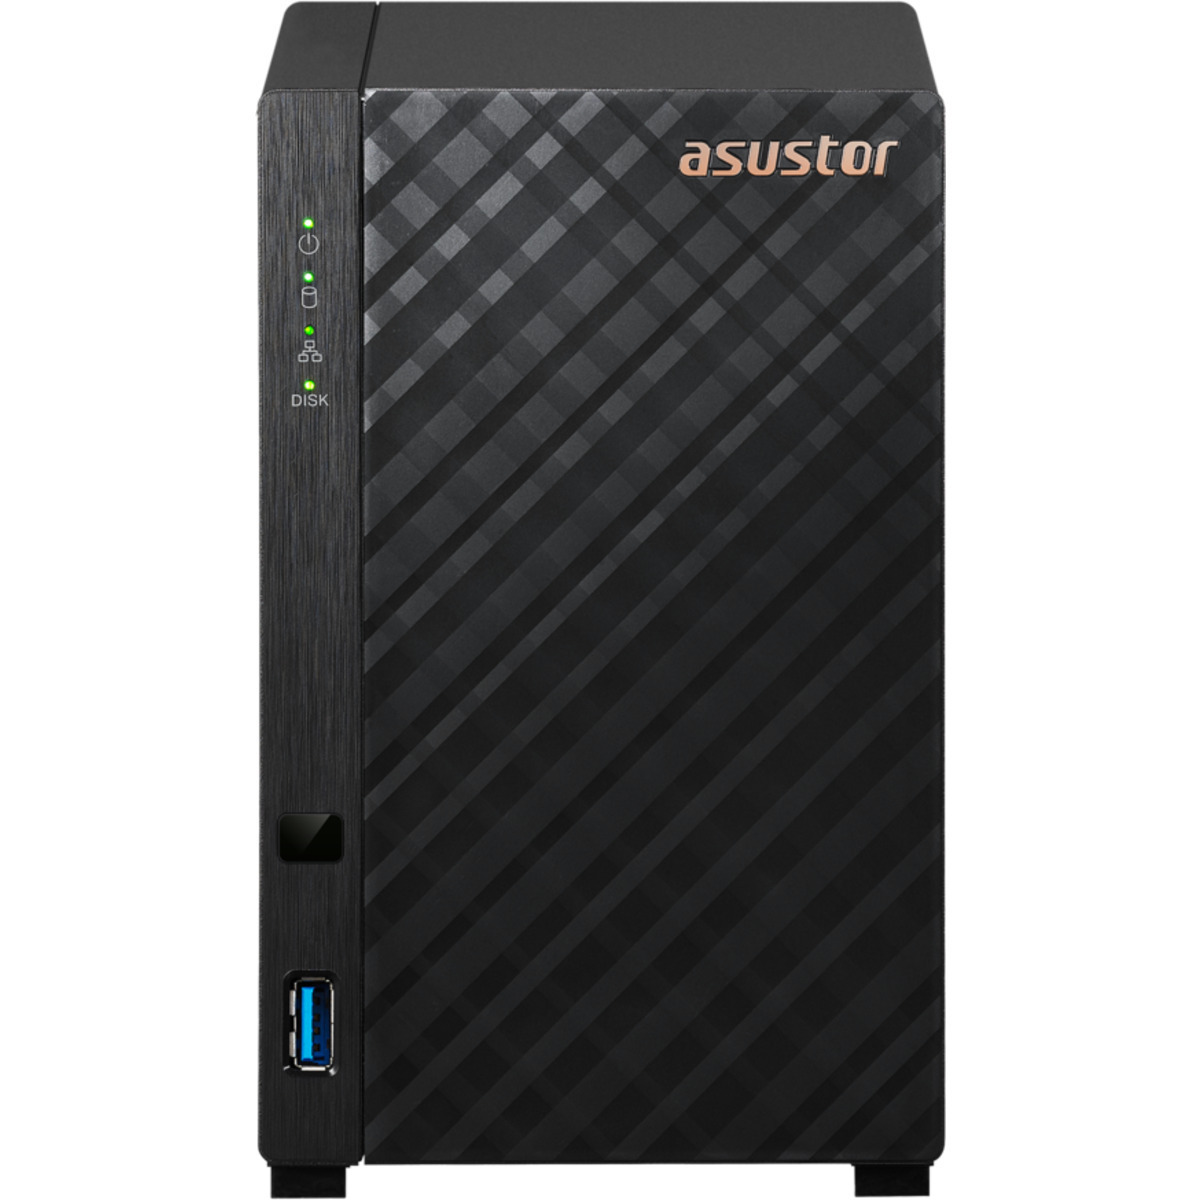 ASUSTOR DRIVESTOR 2 Lite AS1102TL 4tb 2-Bay Desktop Personal / Basic Home / Small Office NAS - Network Attached Storage Device 2x2tb Sandisk Ultra 3D SDSSDH3-2T00 2.5 560/520MB/s SATA 6Gb/s SSD CONSUMER Class Drives Installed - Burn-In Tested DRIVESTOR 2 Lite AS1102TL